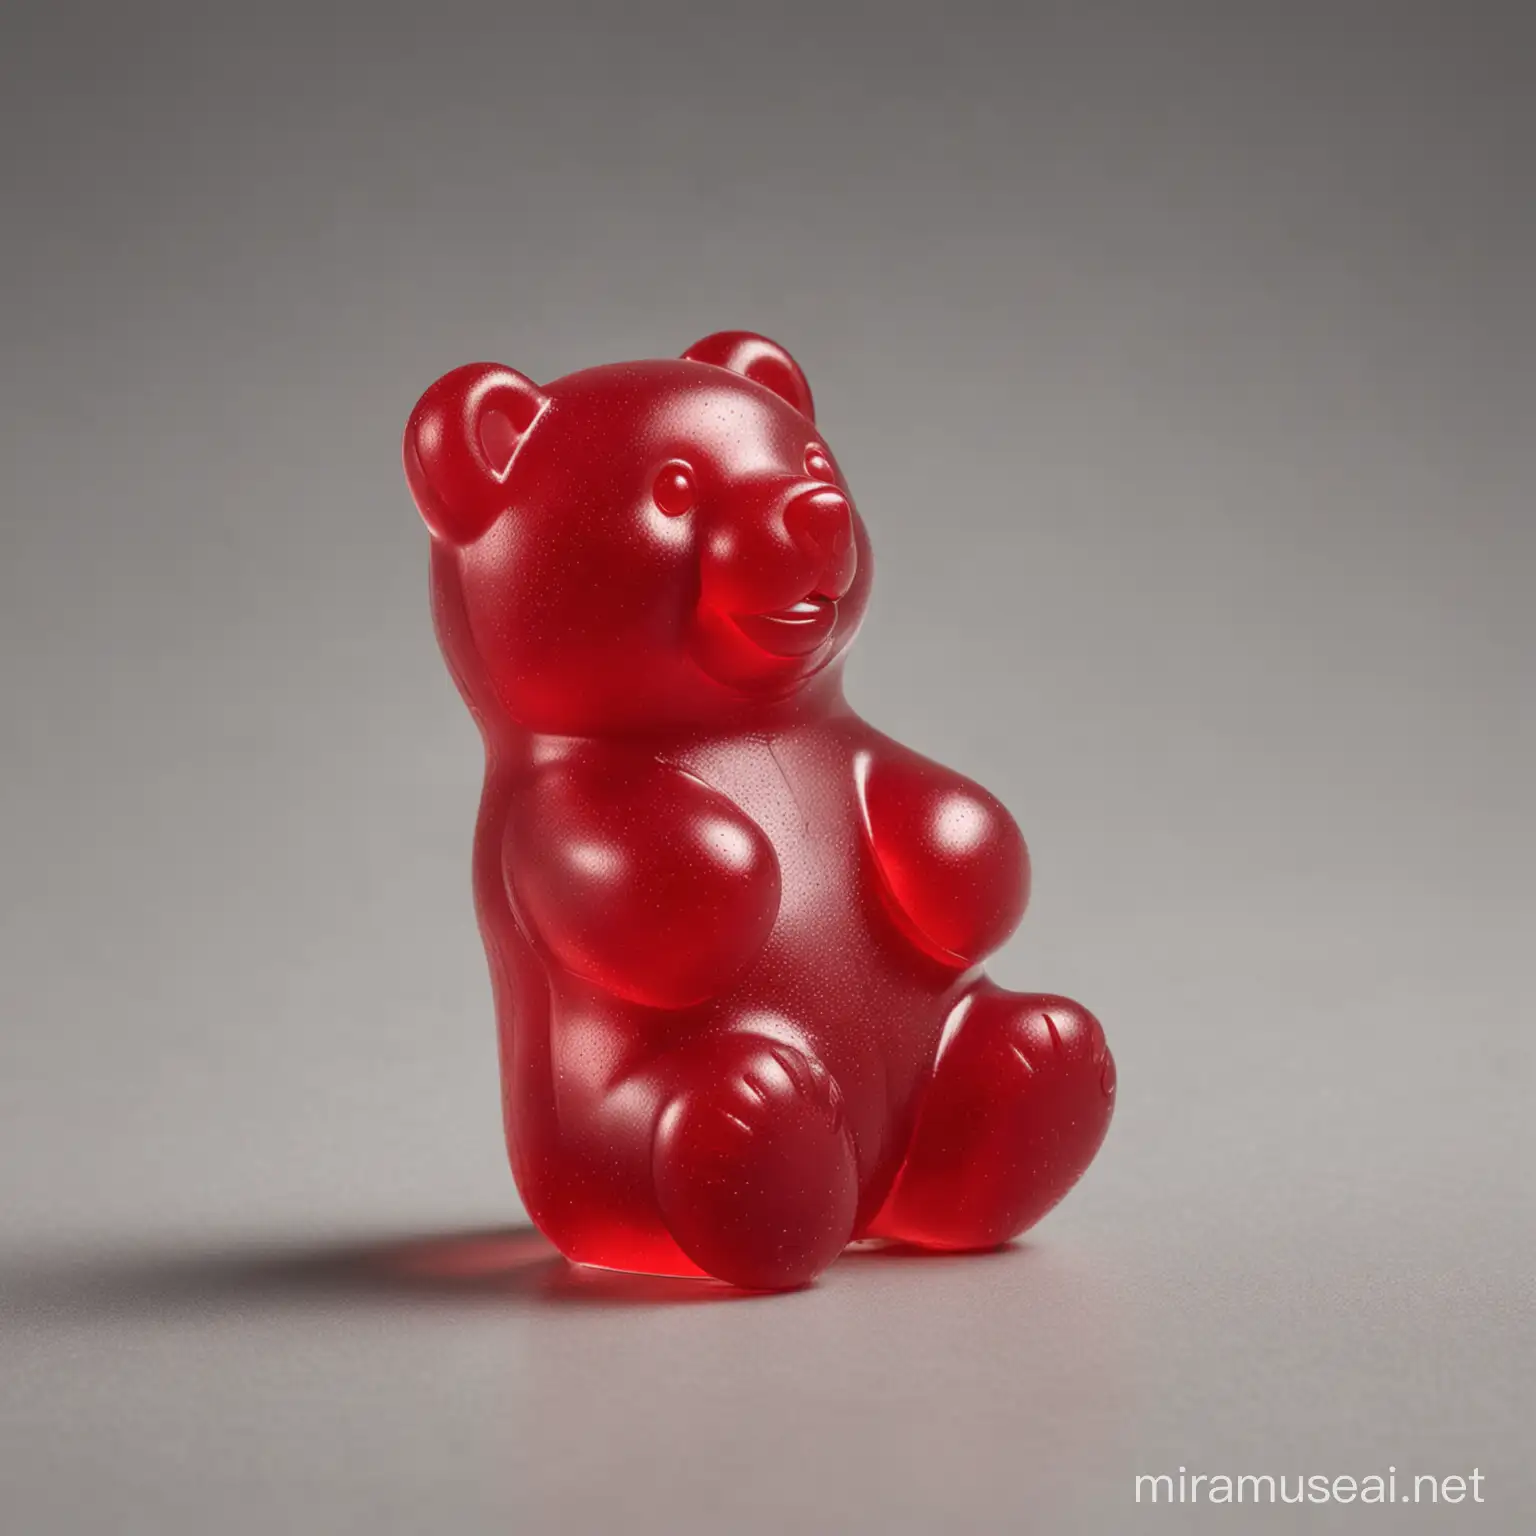 Vibrant Red Gummy Bear Isolated Sweet Treat for Graphic Design Projects